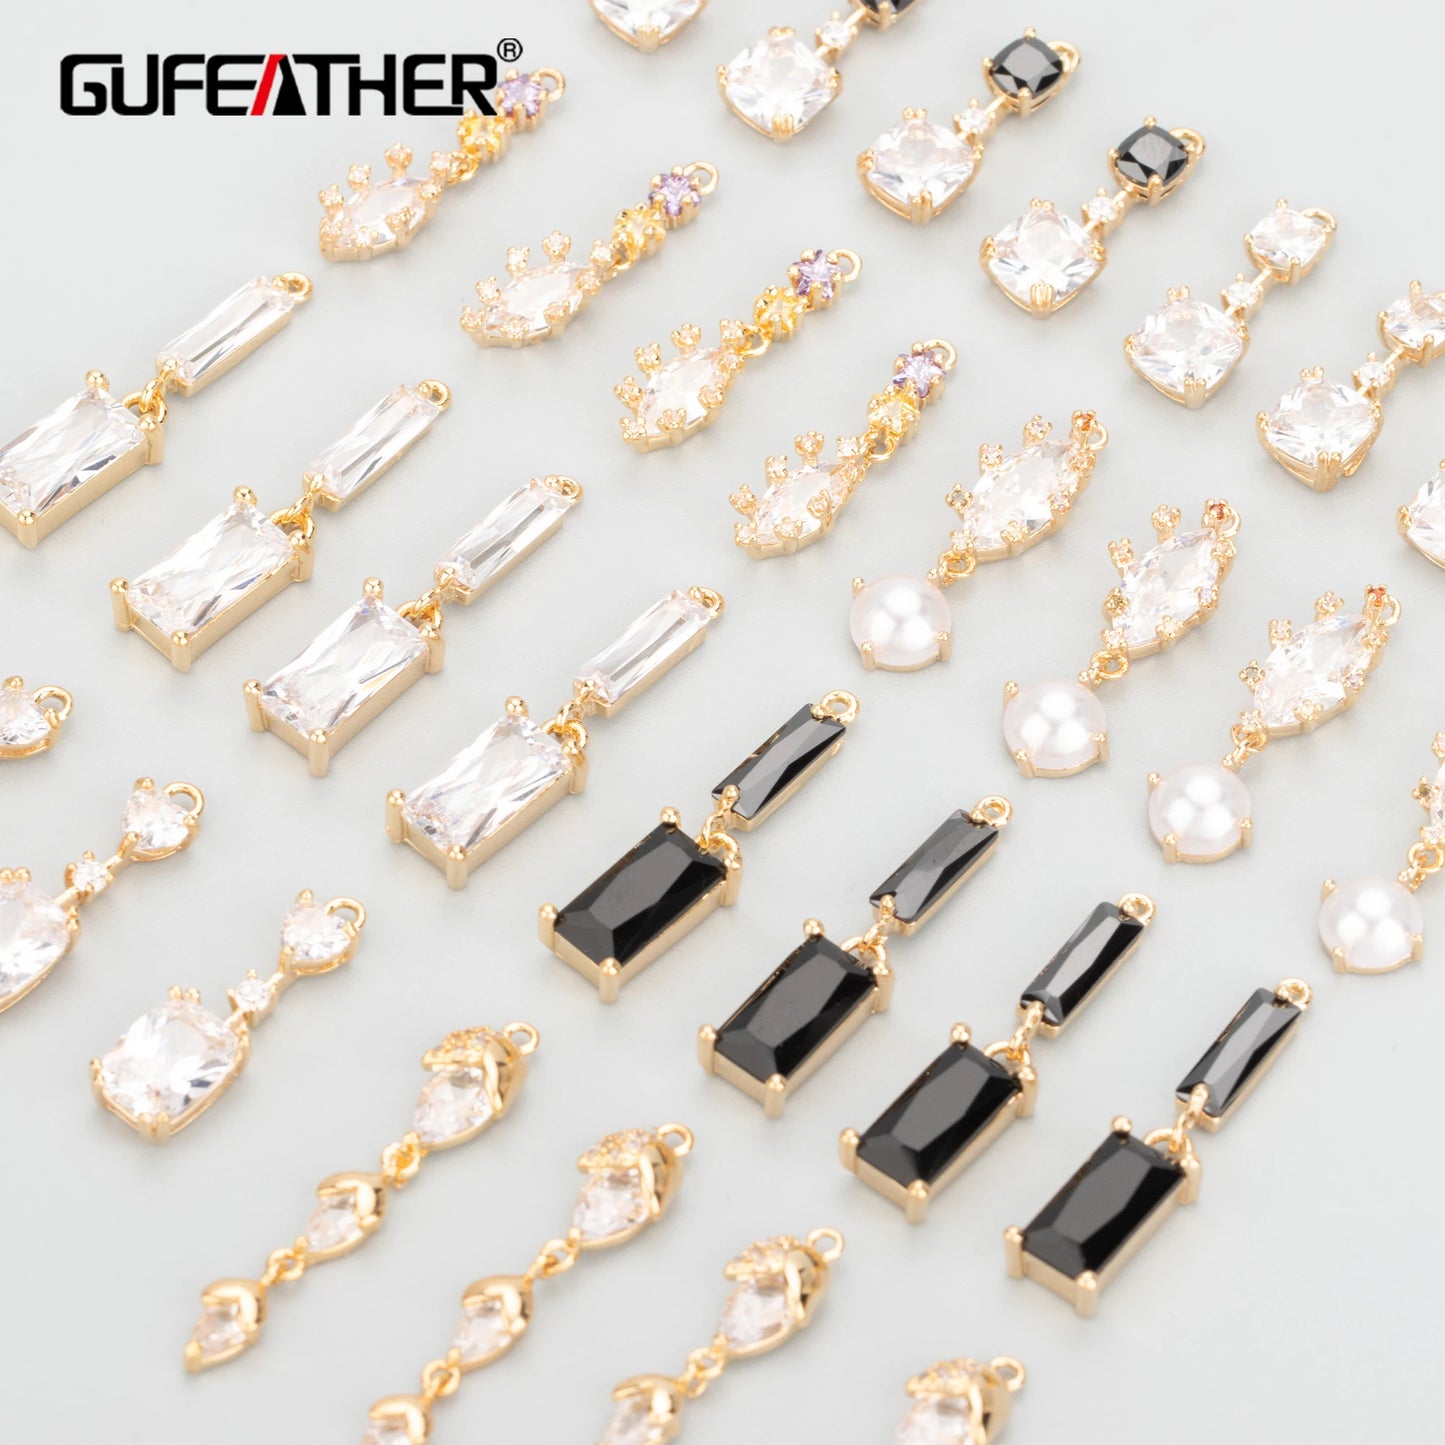 GUFEATHER MB60,jewelry accessories,18k gold plated,nickel free,copper,zircons,glass,charms,jewelry making,diy pendants,6pcs/lot